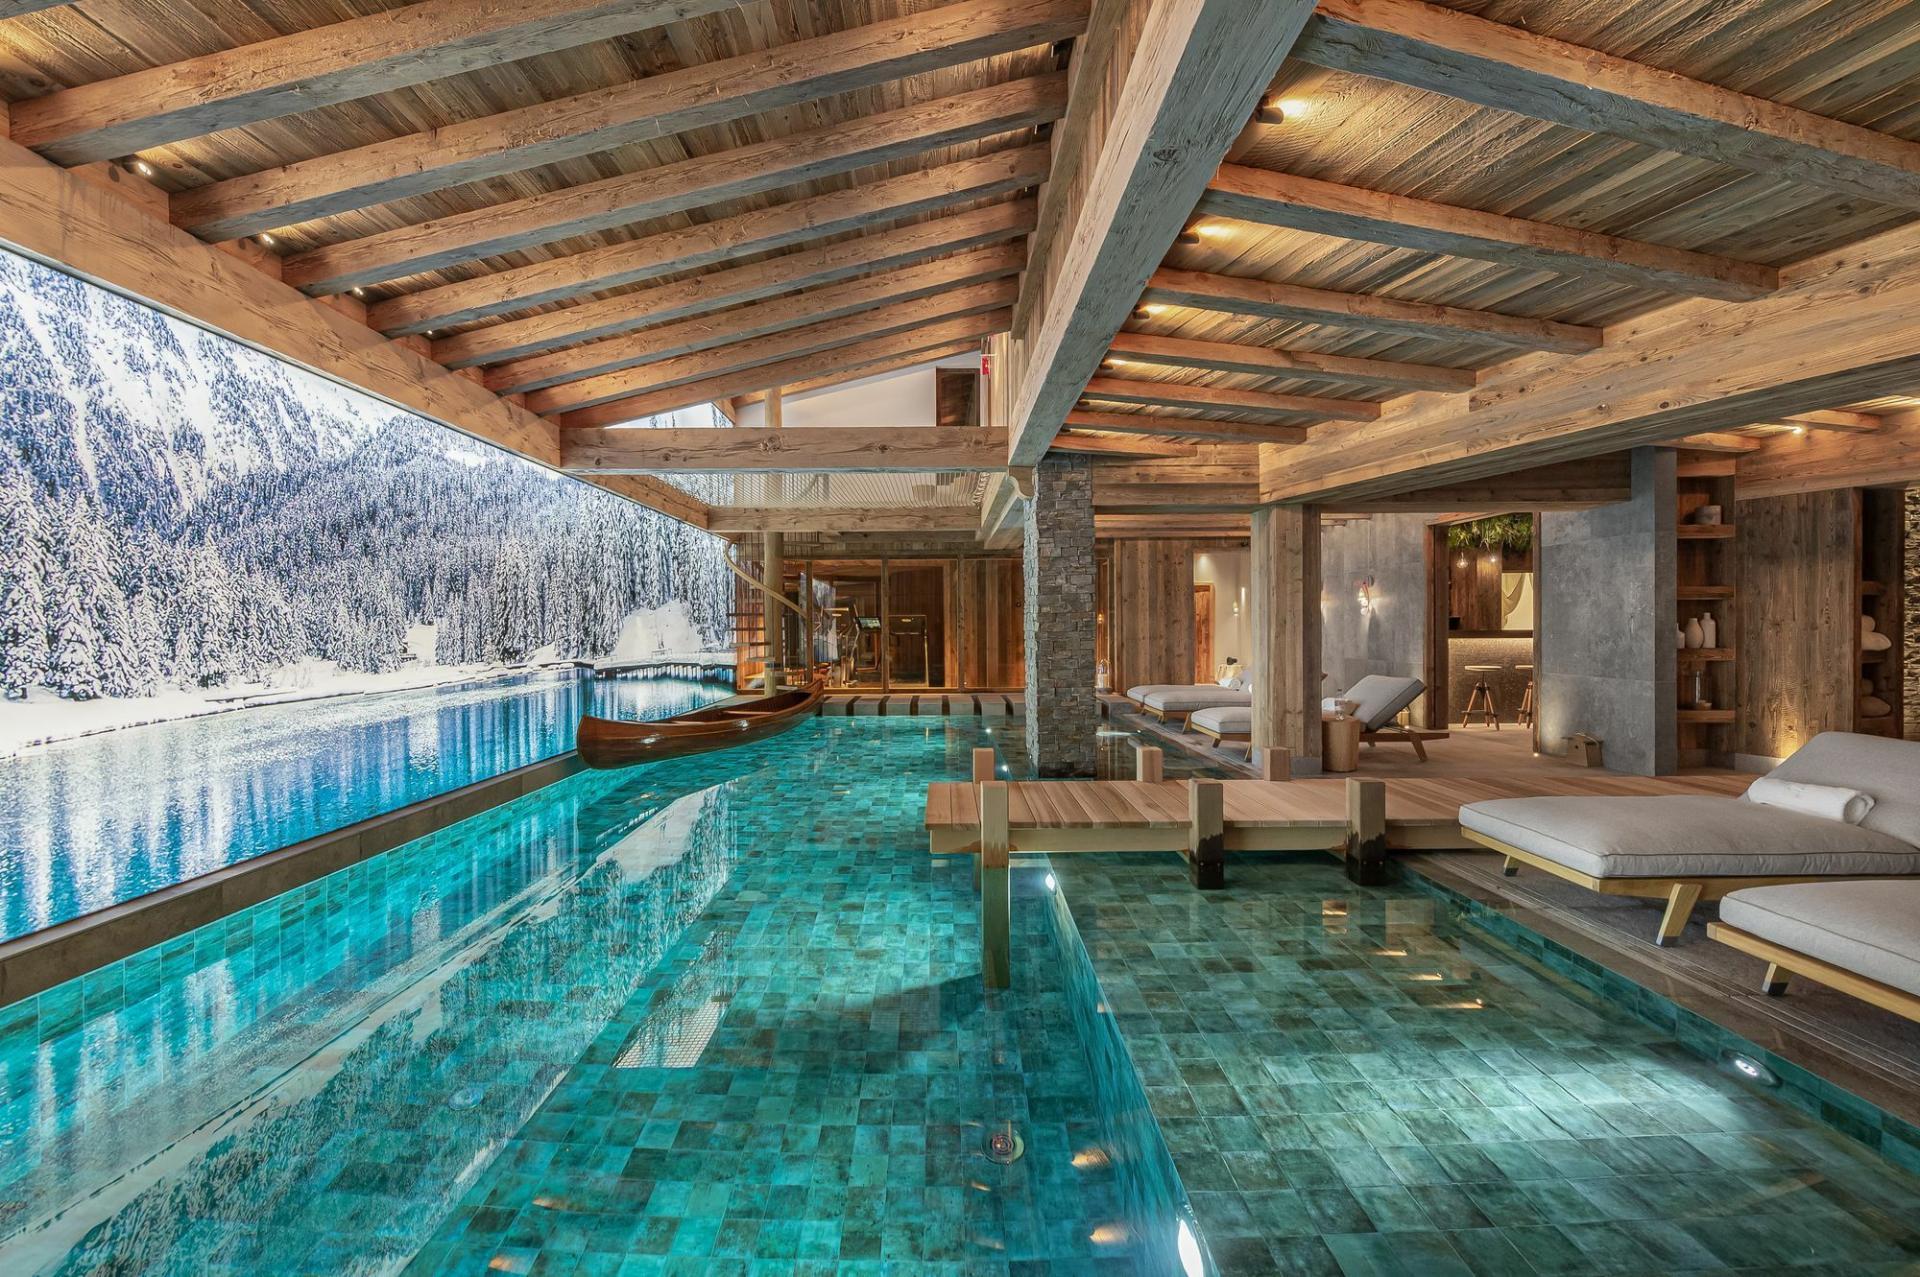 Luxury Swimming Pool in Chalet Bruxellois, designed to mimic a mountain lake. Pictured is the pool with a small jetty and boat, a truly unique ski chalet with a swimming pool.